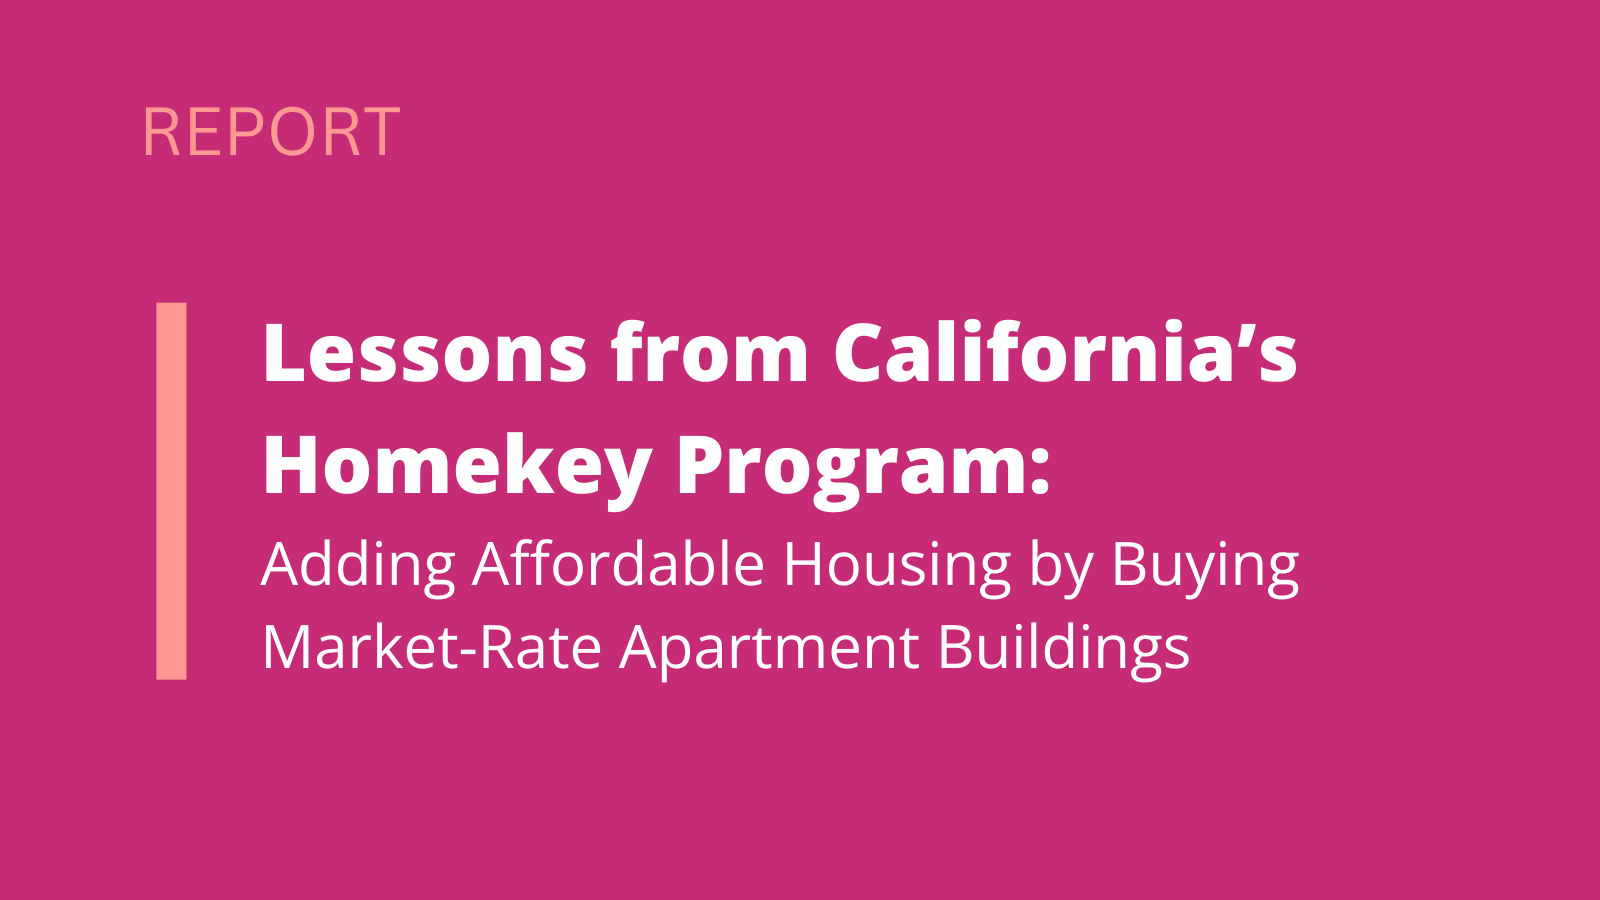 Lessons from California's Homekey Program: Adding Affordable Housing by Buying Market-Rate Apartment Buildings